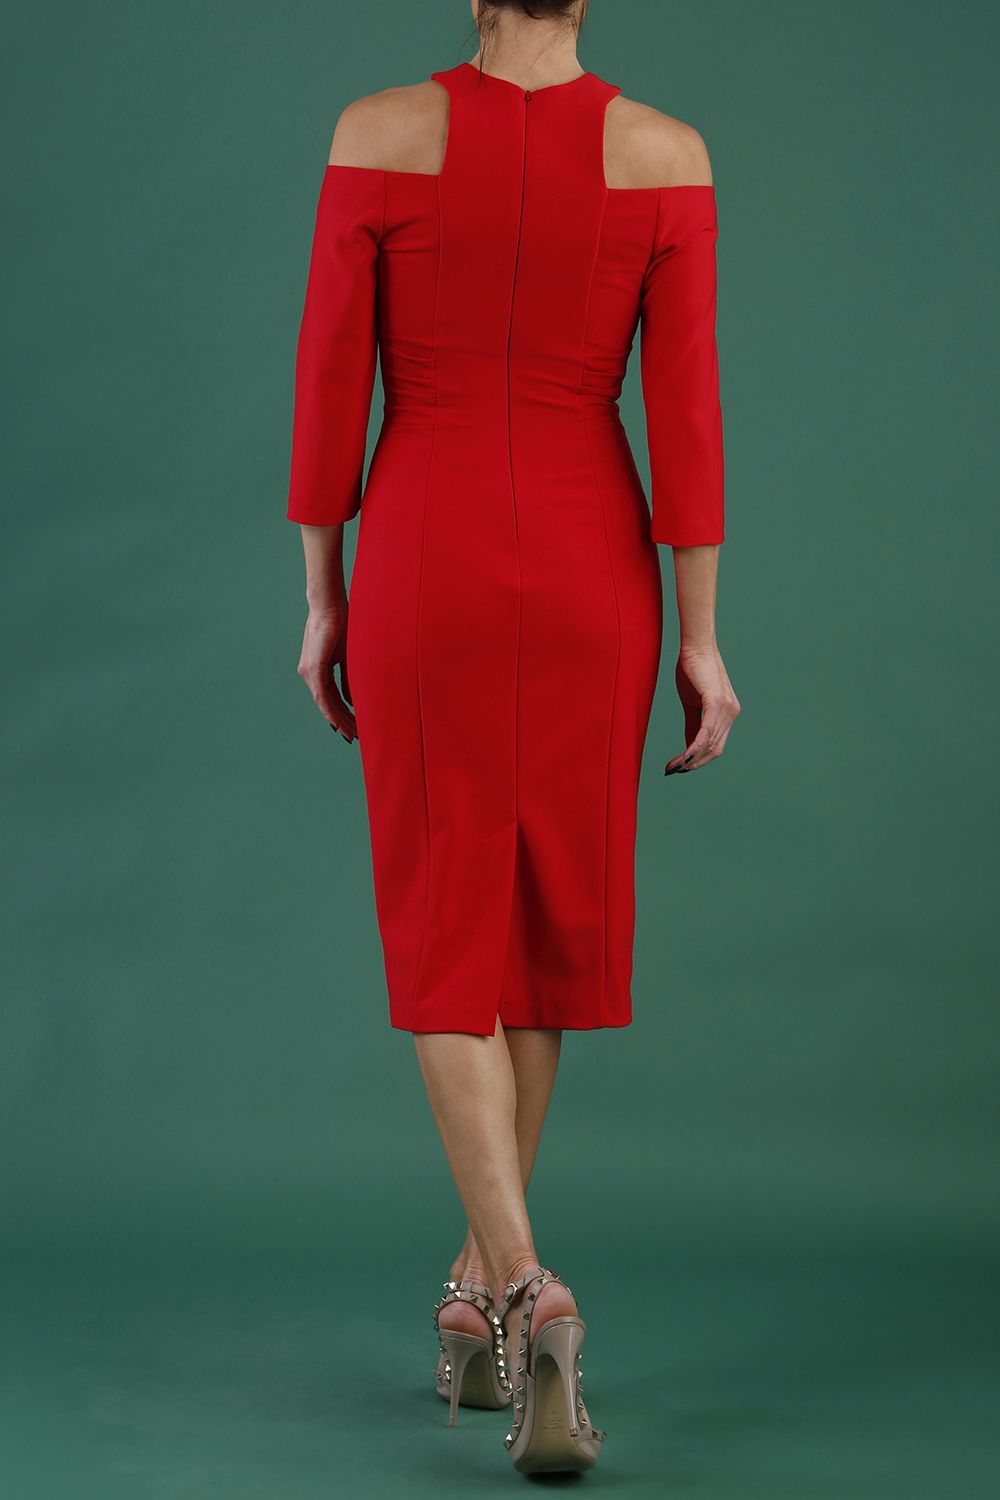 model is wearing diva catwalk kelso sleeved pencil dress with shoulder cut out and rounded high neck in electric red back